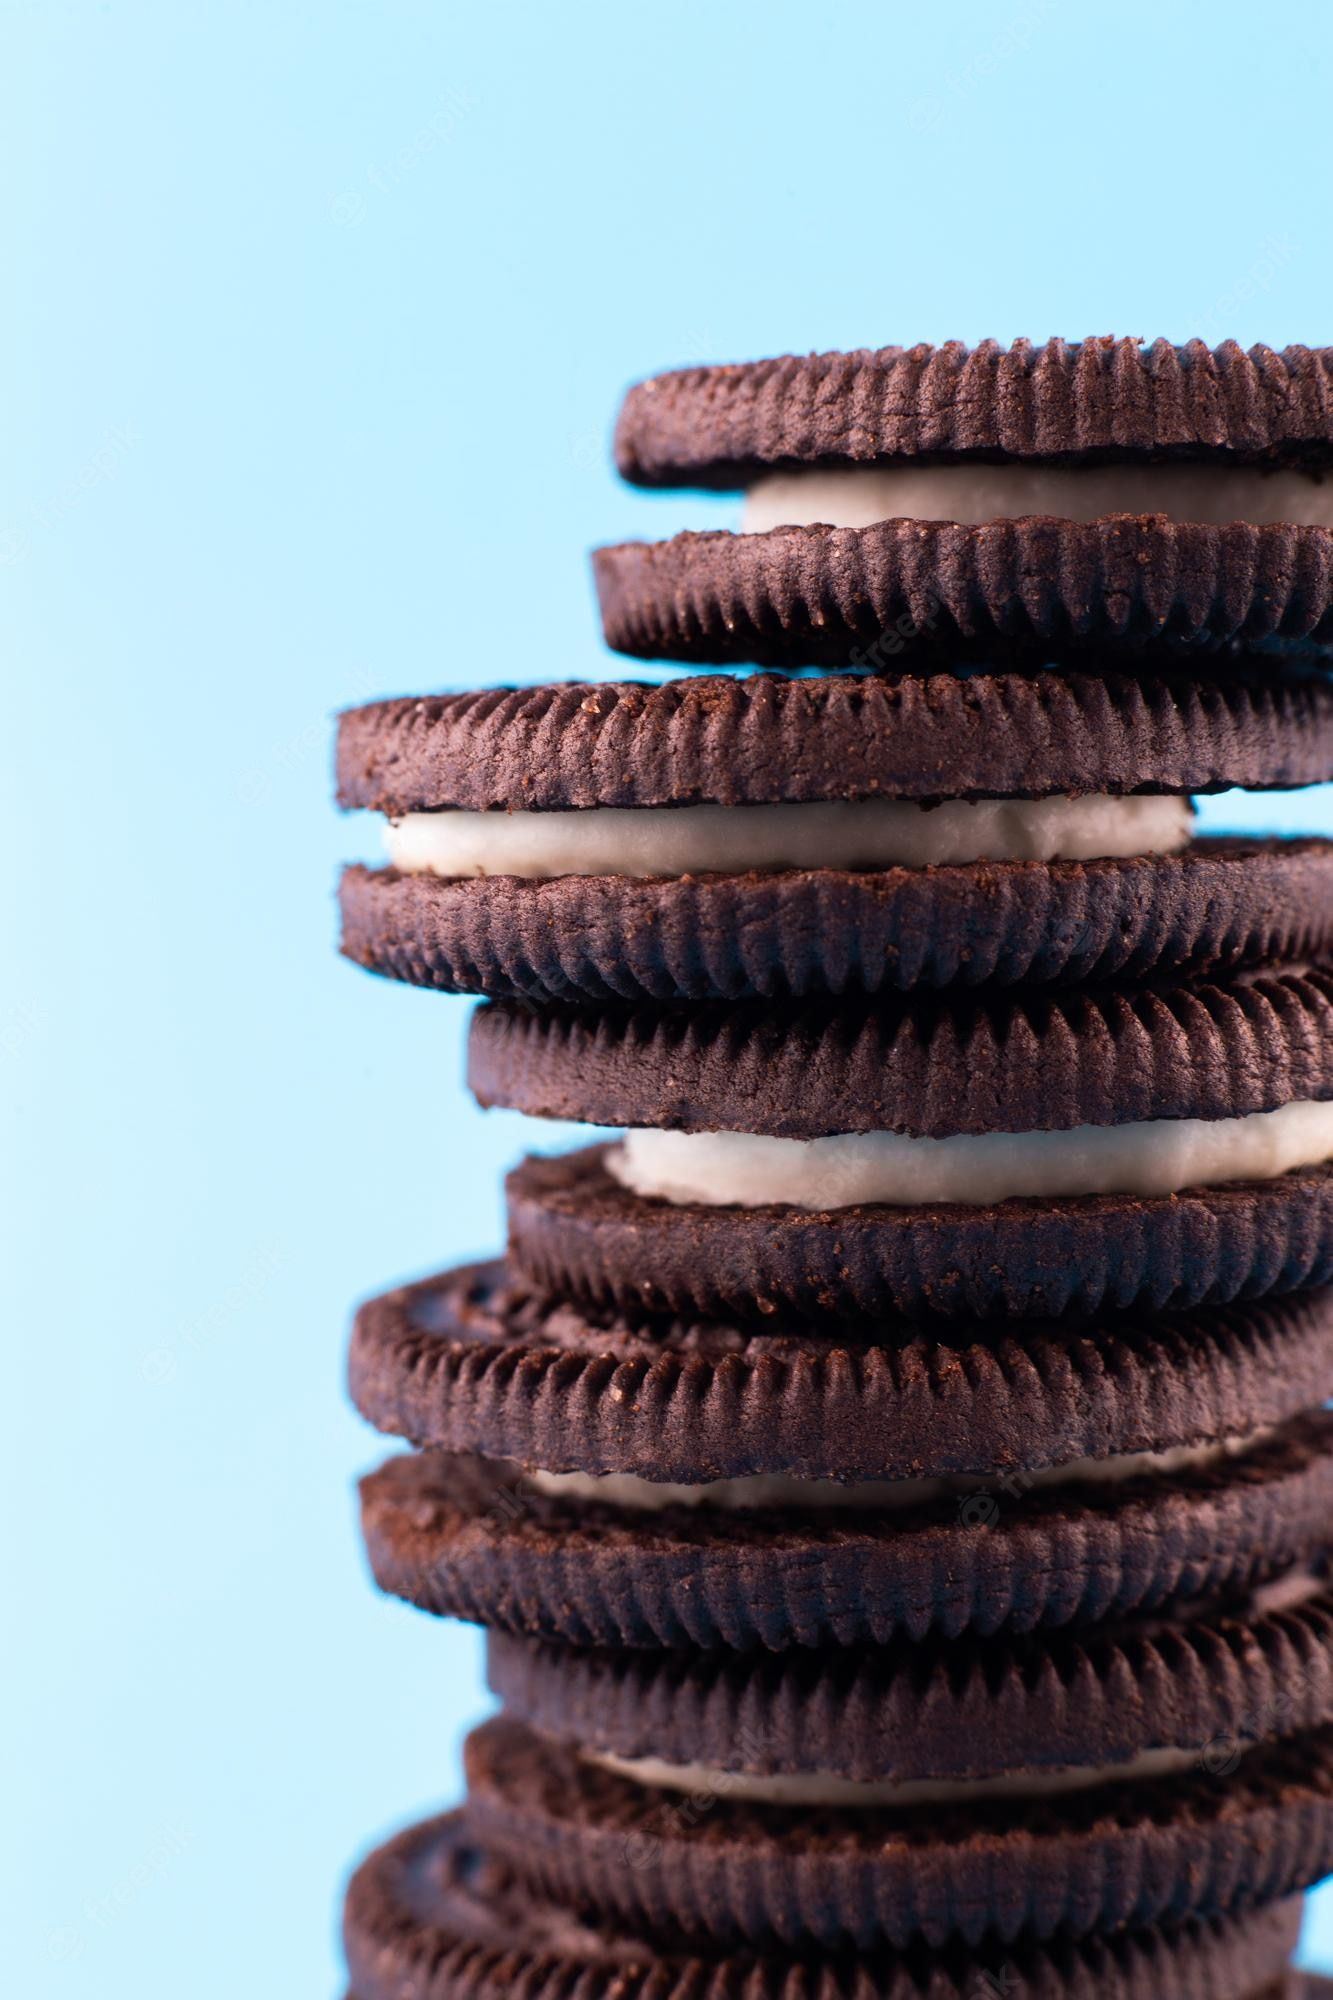 A stack of chocolate sandwich cookies on a blue background - Oreo